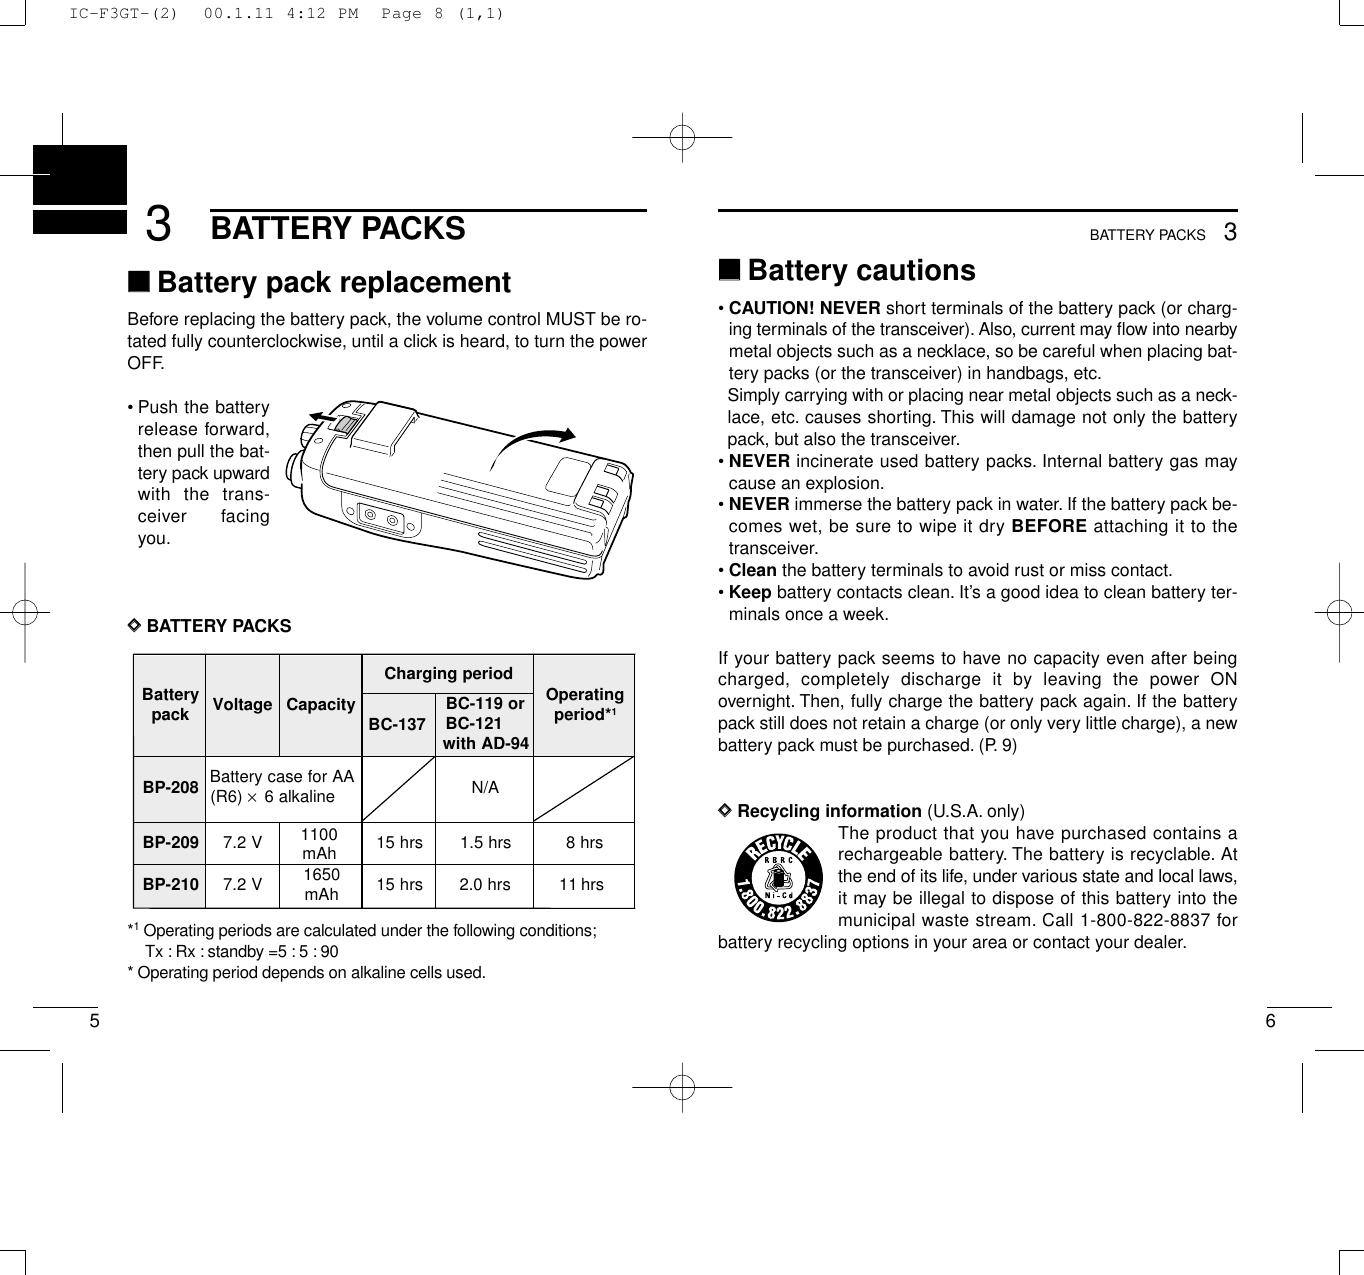 653BATTERY PACKS3BATTERY PACKS‘‘Battery cautions• CAUTION! NEVER short terminals of the battery pack (or charg-ing terminals of the transceiver). Also, current may ﬂow into nearbymetal objects such as a necklace, so be careful when placing bat-tery packs (or the transceiver) in handbags, etc.Simply carrying with or placing near metal objects such as a neck-lace, etc. causes shorting. This will damage not only the batterypack, but also the transceiver.• NEVER incinerate used battery packs. Internal battery gas maycause an explosion.• NEVER immerse the battery pack in water. If the battery pack be-comes wet, be sure to wipe it dry BEFORE attaching it to thetransceiver.• Clean the battery terminals to avoid rust or miss contact.• Keep battery contacts clean. It’s a good idea to clean battery ter-minals once a week.If your battery pack seems to have no capacity even after beingcharged, completely discharge it by leaving the power ONovernight. Then, fully charge the battery pack again. If the batterypack still does not retain a charge (or only very little charge), a newbattery pack must be purchased. (P. 9)DDRecycling information (U.S.A. only)The product that you have purchased contains arechargeable battery. The battery is recyclable. Atthe end of its life, under various state and local laws,it may be illegal to dispose of this battery into themunicipal waste stream. Call 1-800-822-8837 forbattery recycling options in your area or contact your dealer.‘‘Battery pack replacementBefore replacing the battery pack, the volume control MUST be ro-tated fully counterclockwise, until a click is heard, to turn the powerOFF.•Push the batteryrelease forward,then pull the bat-tery pack upwardwith the trans-ceiver facingyou.DDBATTERY PACKS*1Operating periods are calculated under the following conditions;Tx : Rx : standby =5 : 5 : 90* Operating period depends on alkaline cells used.yrettaB kcap egatloV yticapaCdoirepgnigrahC gnitarepO *doirep1BC-137ro911-CB 121-CB 49-DAhtiw802-PB AArofesacyrettaB)6R( ×enilakla6 A/N902-PB V2.71100srh51srh5.1srh8012-PB V2.7 0561 hAm srh51srh0.2srh111100mAhIC-F3GT-(2)  00.1.11 4:12 PM  Page 8 (1,1)